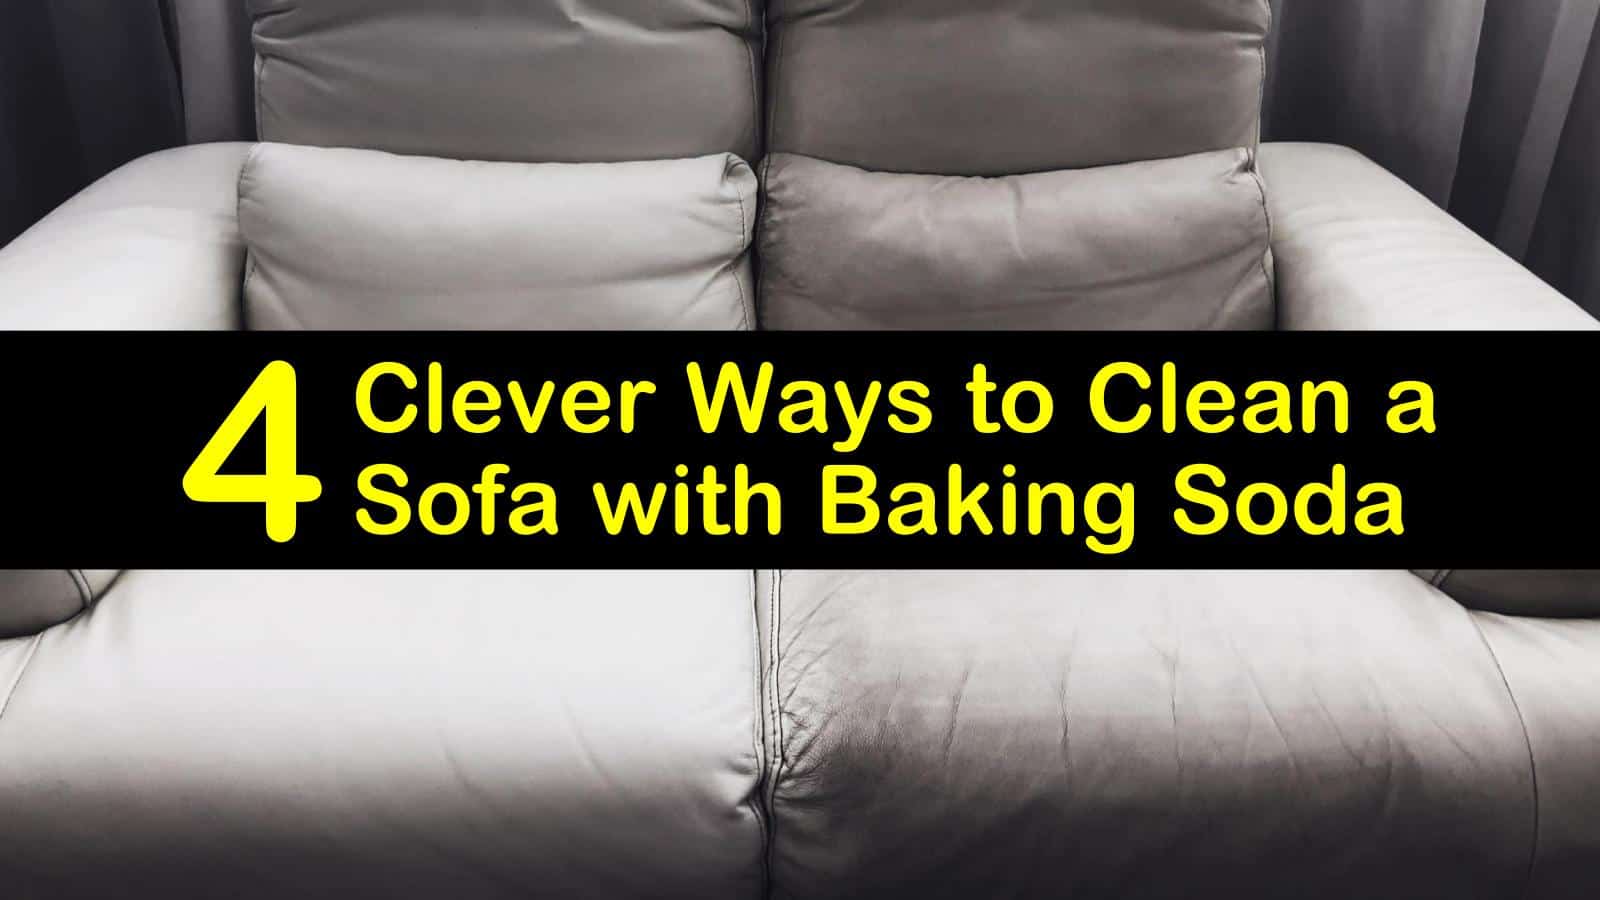 Clean A Sofa With Baking Soda, How To Clean A Sofa With Bicarbonate Of Soda